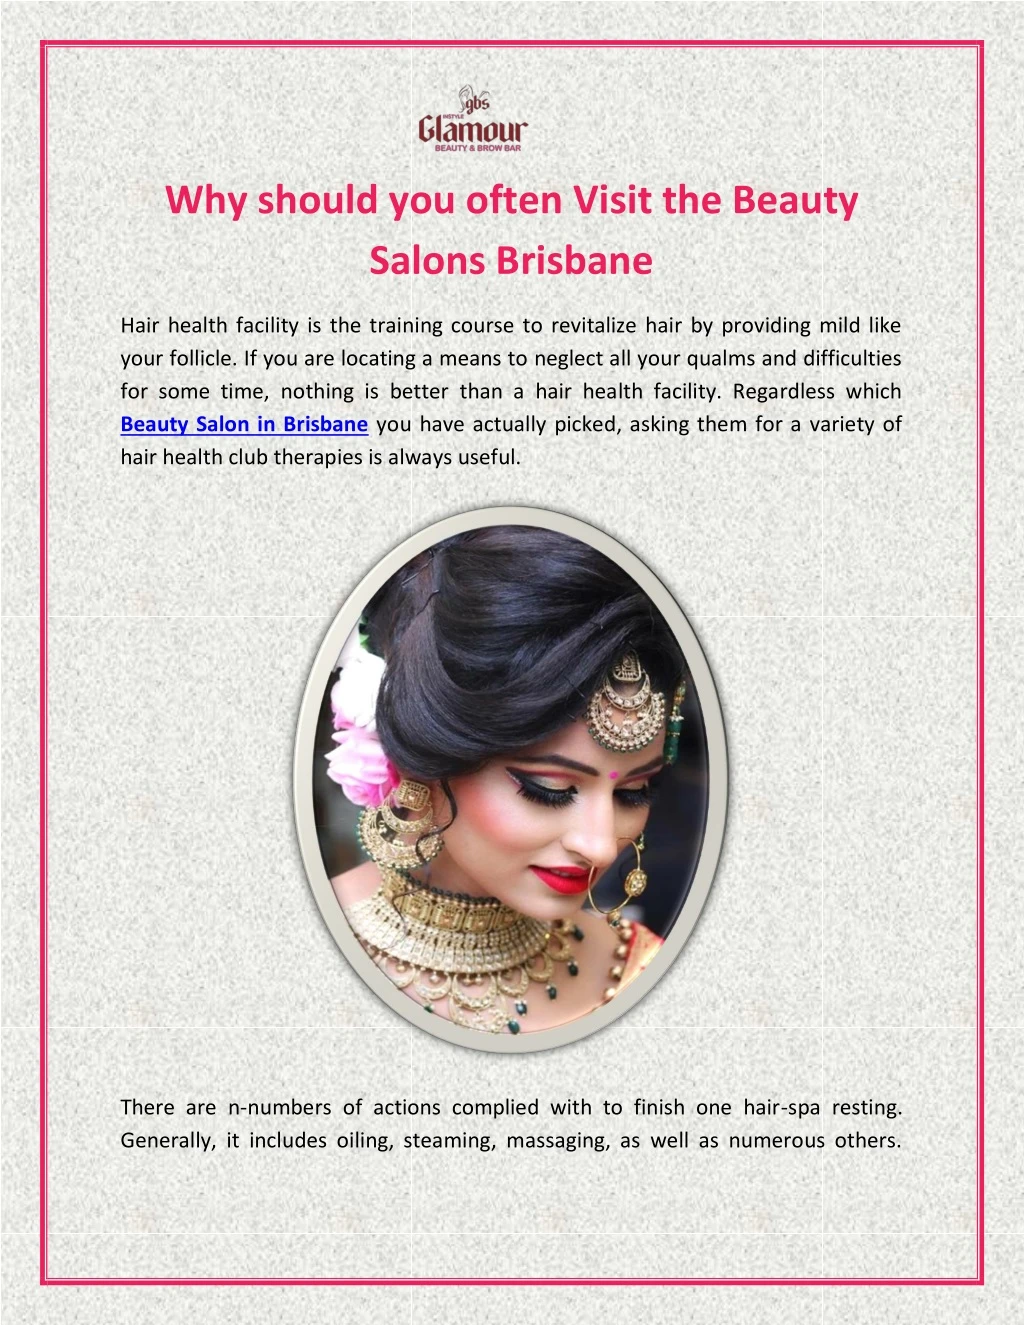 why should you often visit the beauty salons